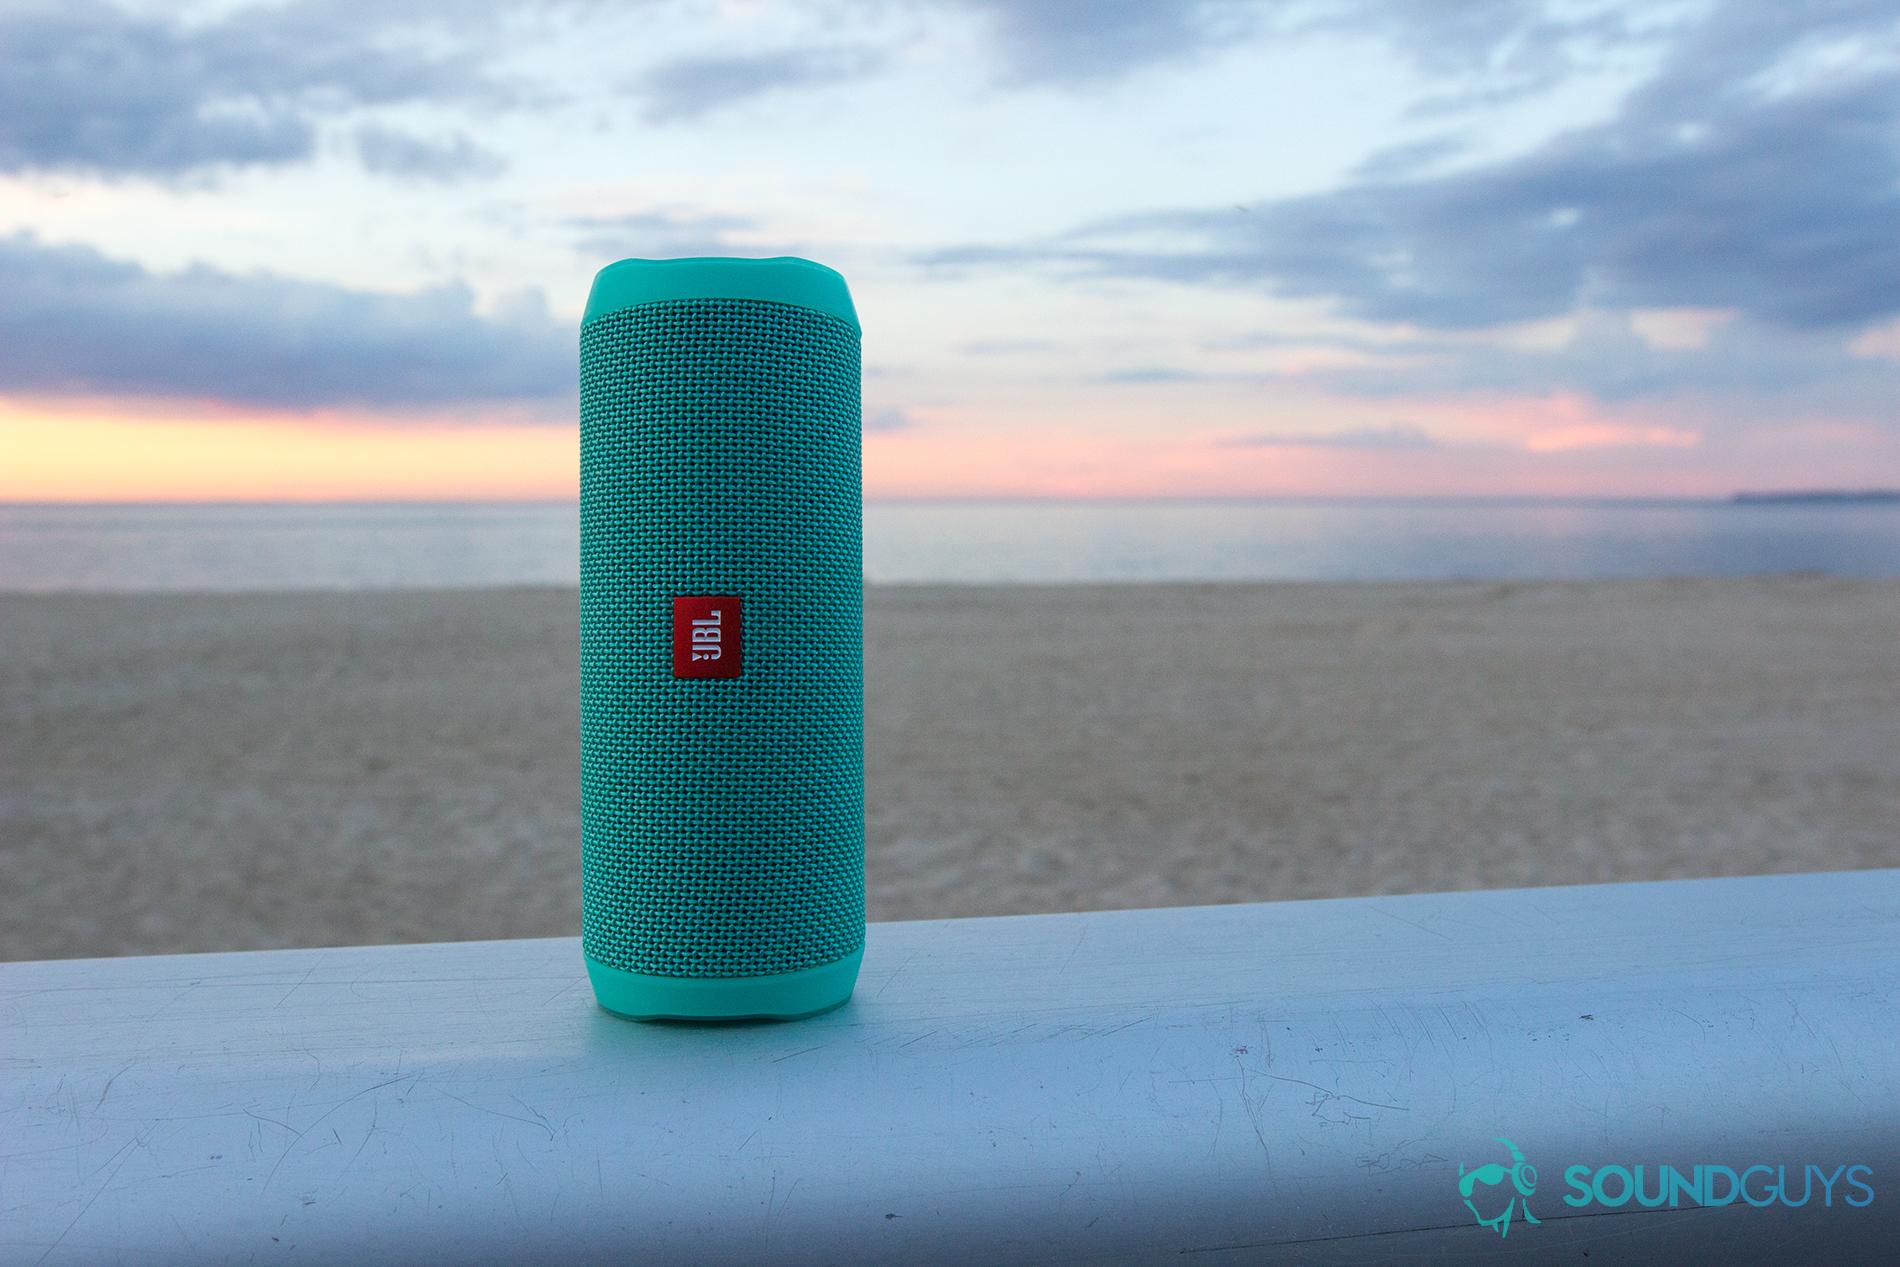 JBL Flip 4 at the beach, with a sunset and the ocean in the background.